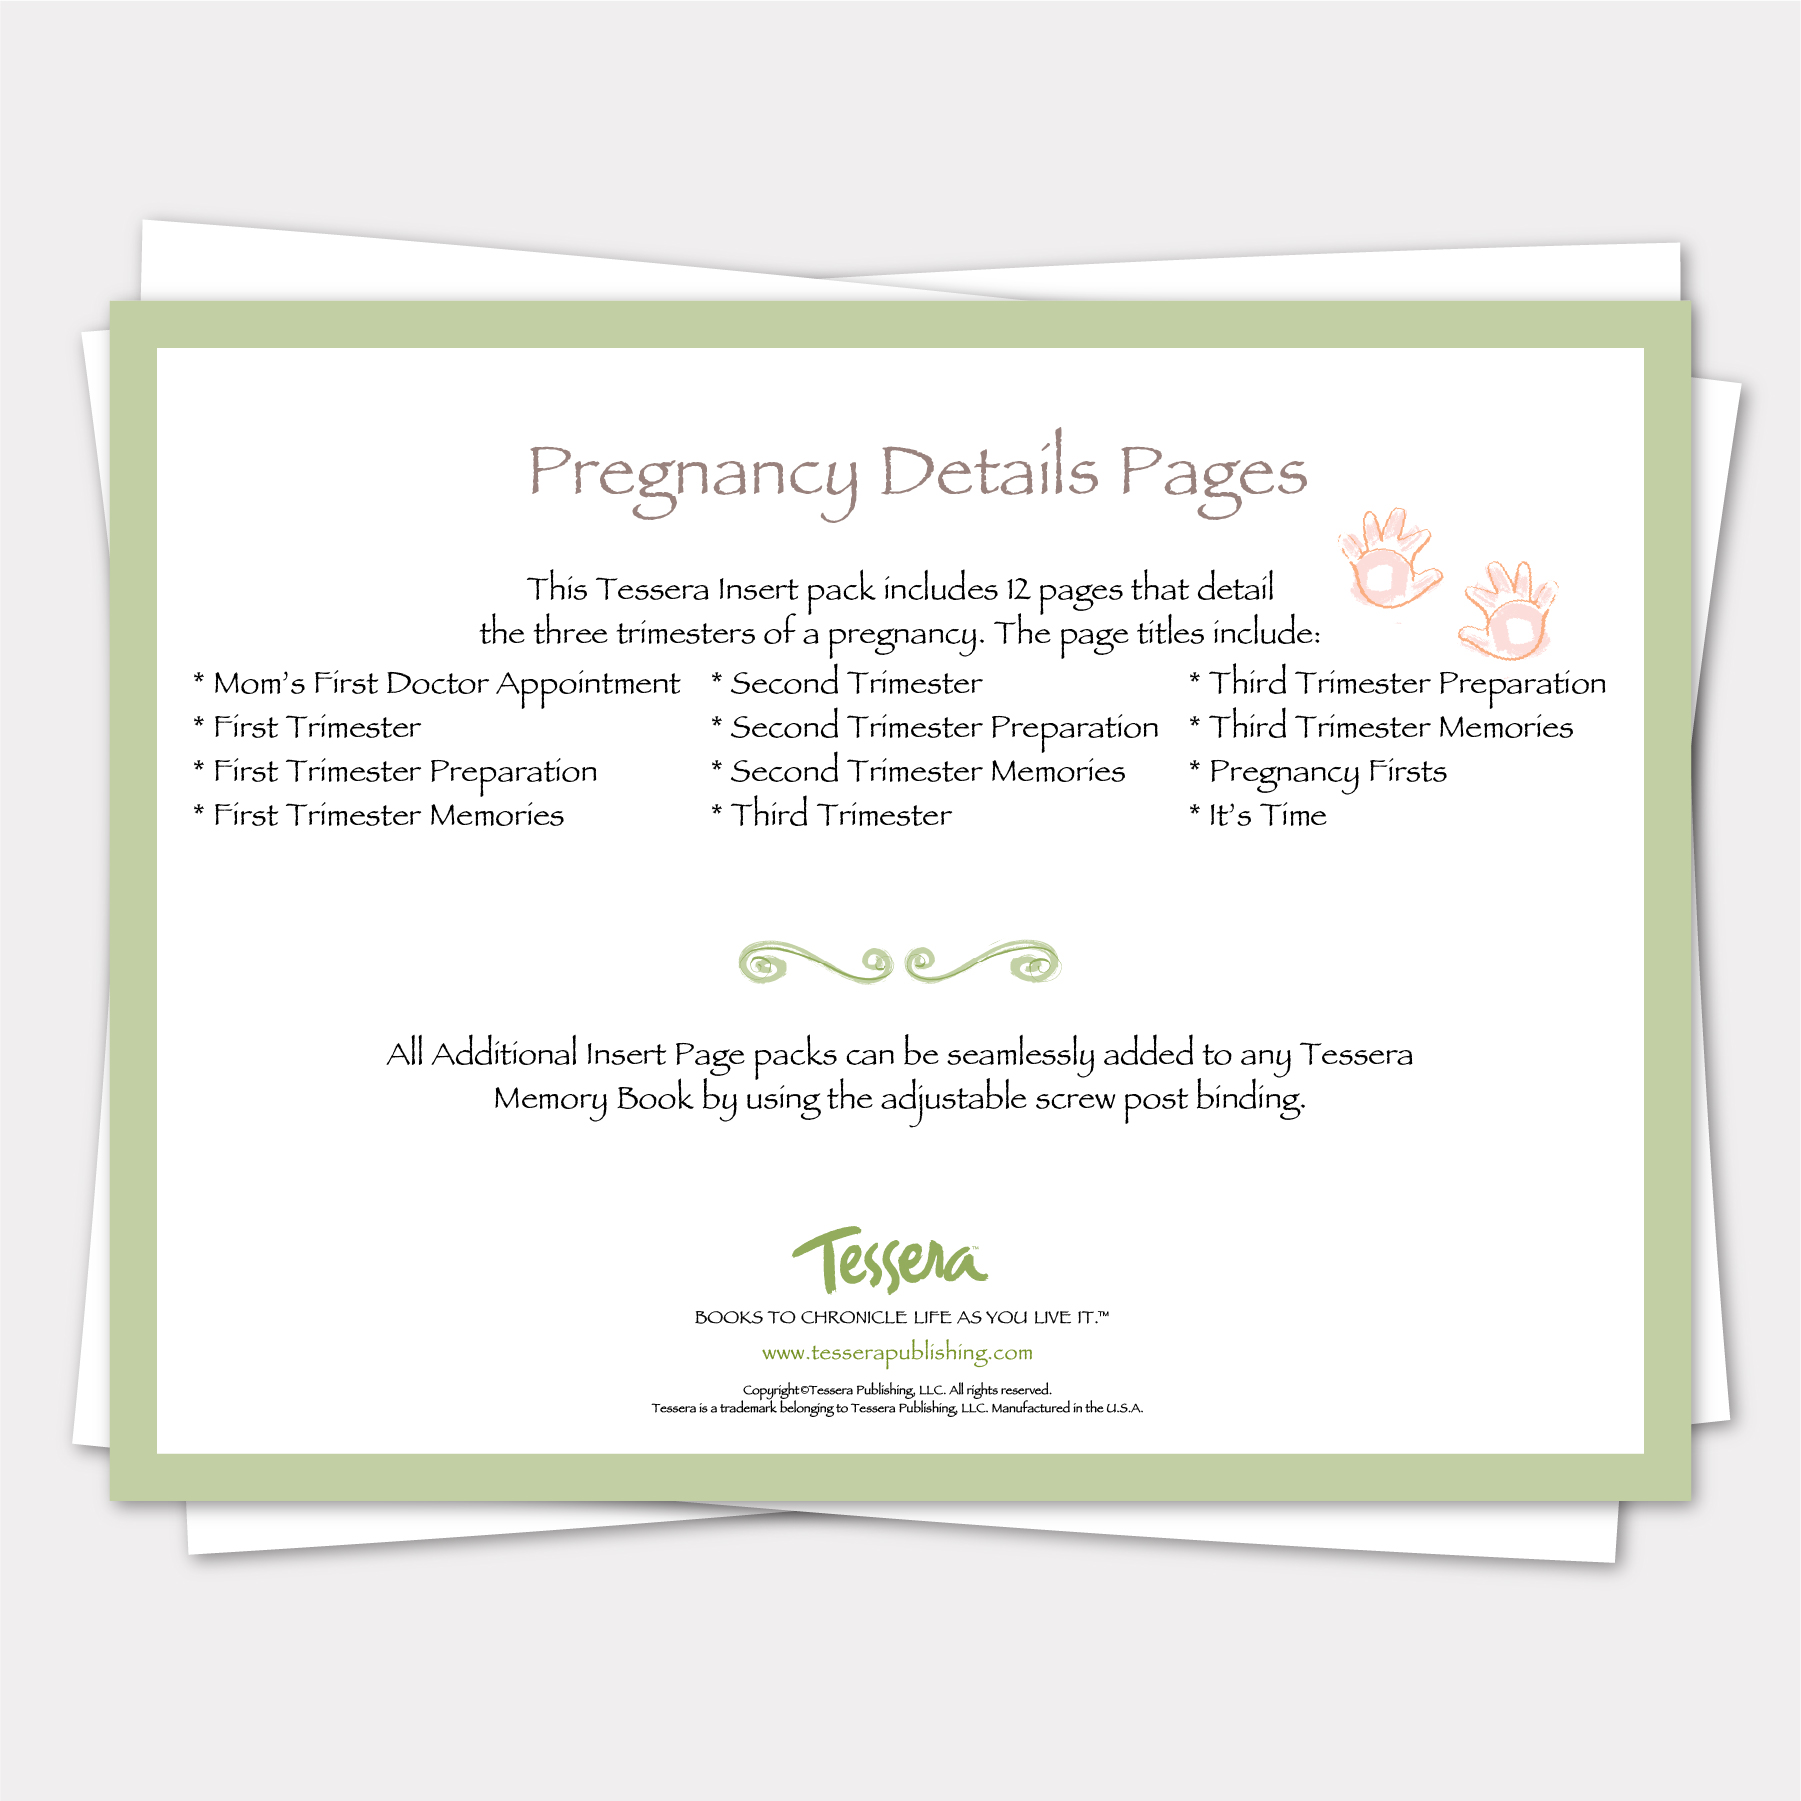 pregnancy details additional insert pages for tessera memory books